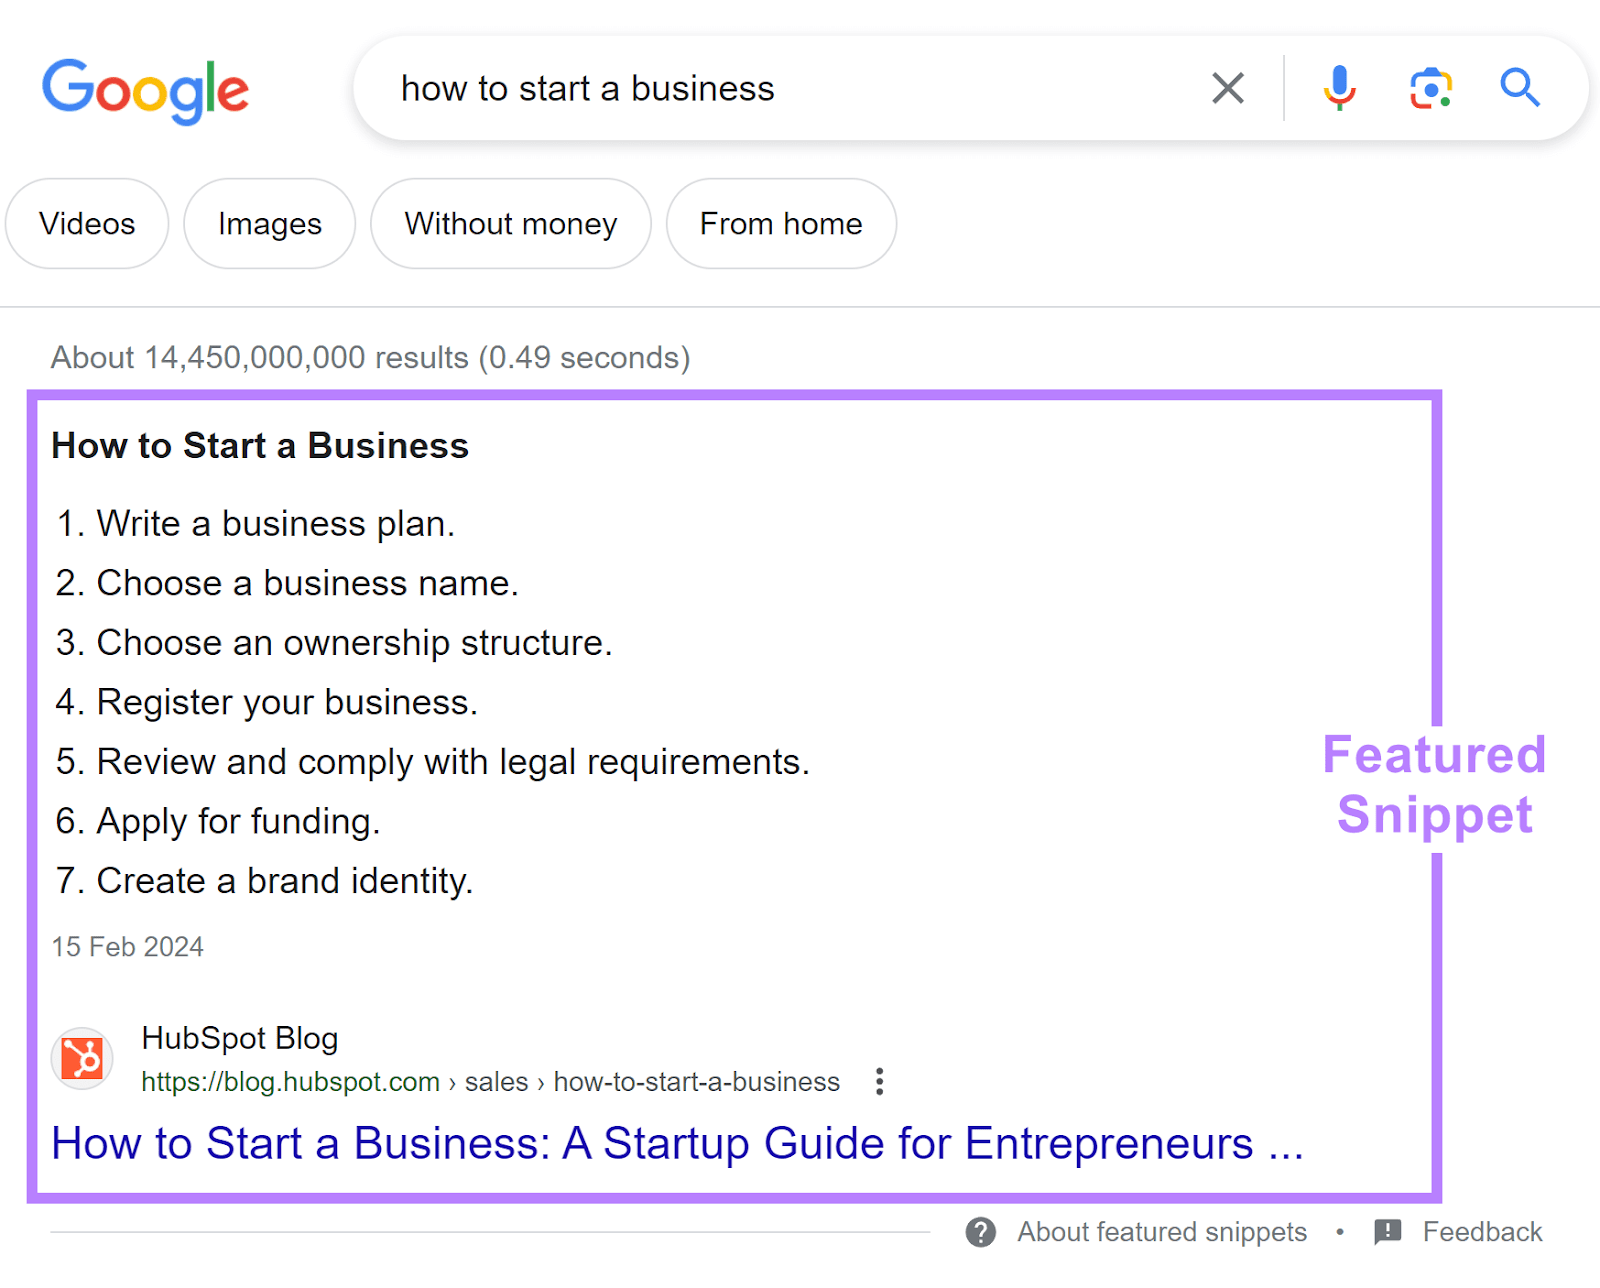 A featured snippet on Google SERP for "how to start a business" query